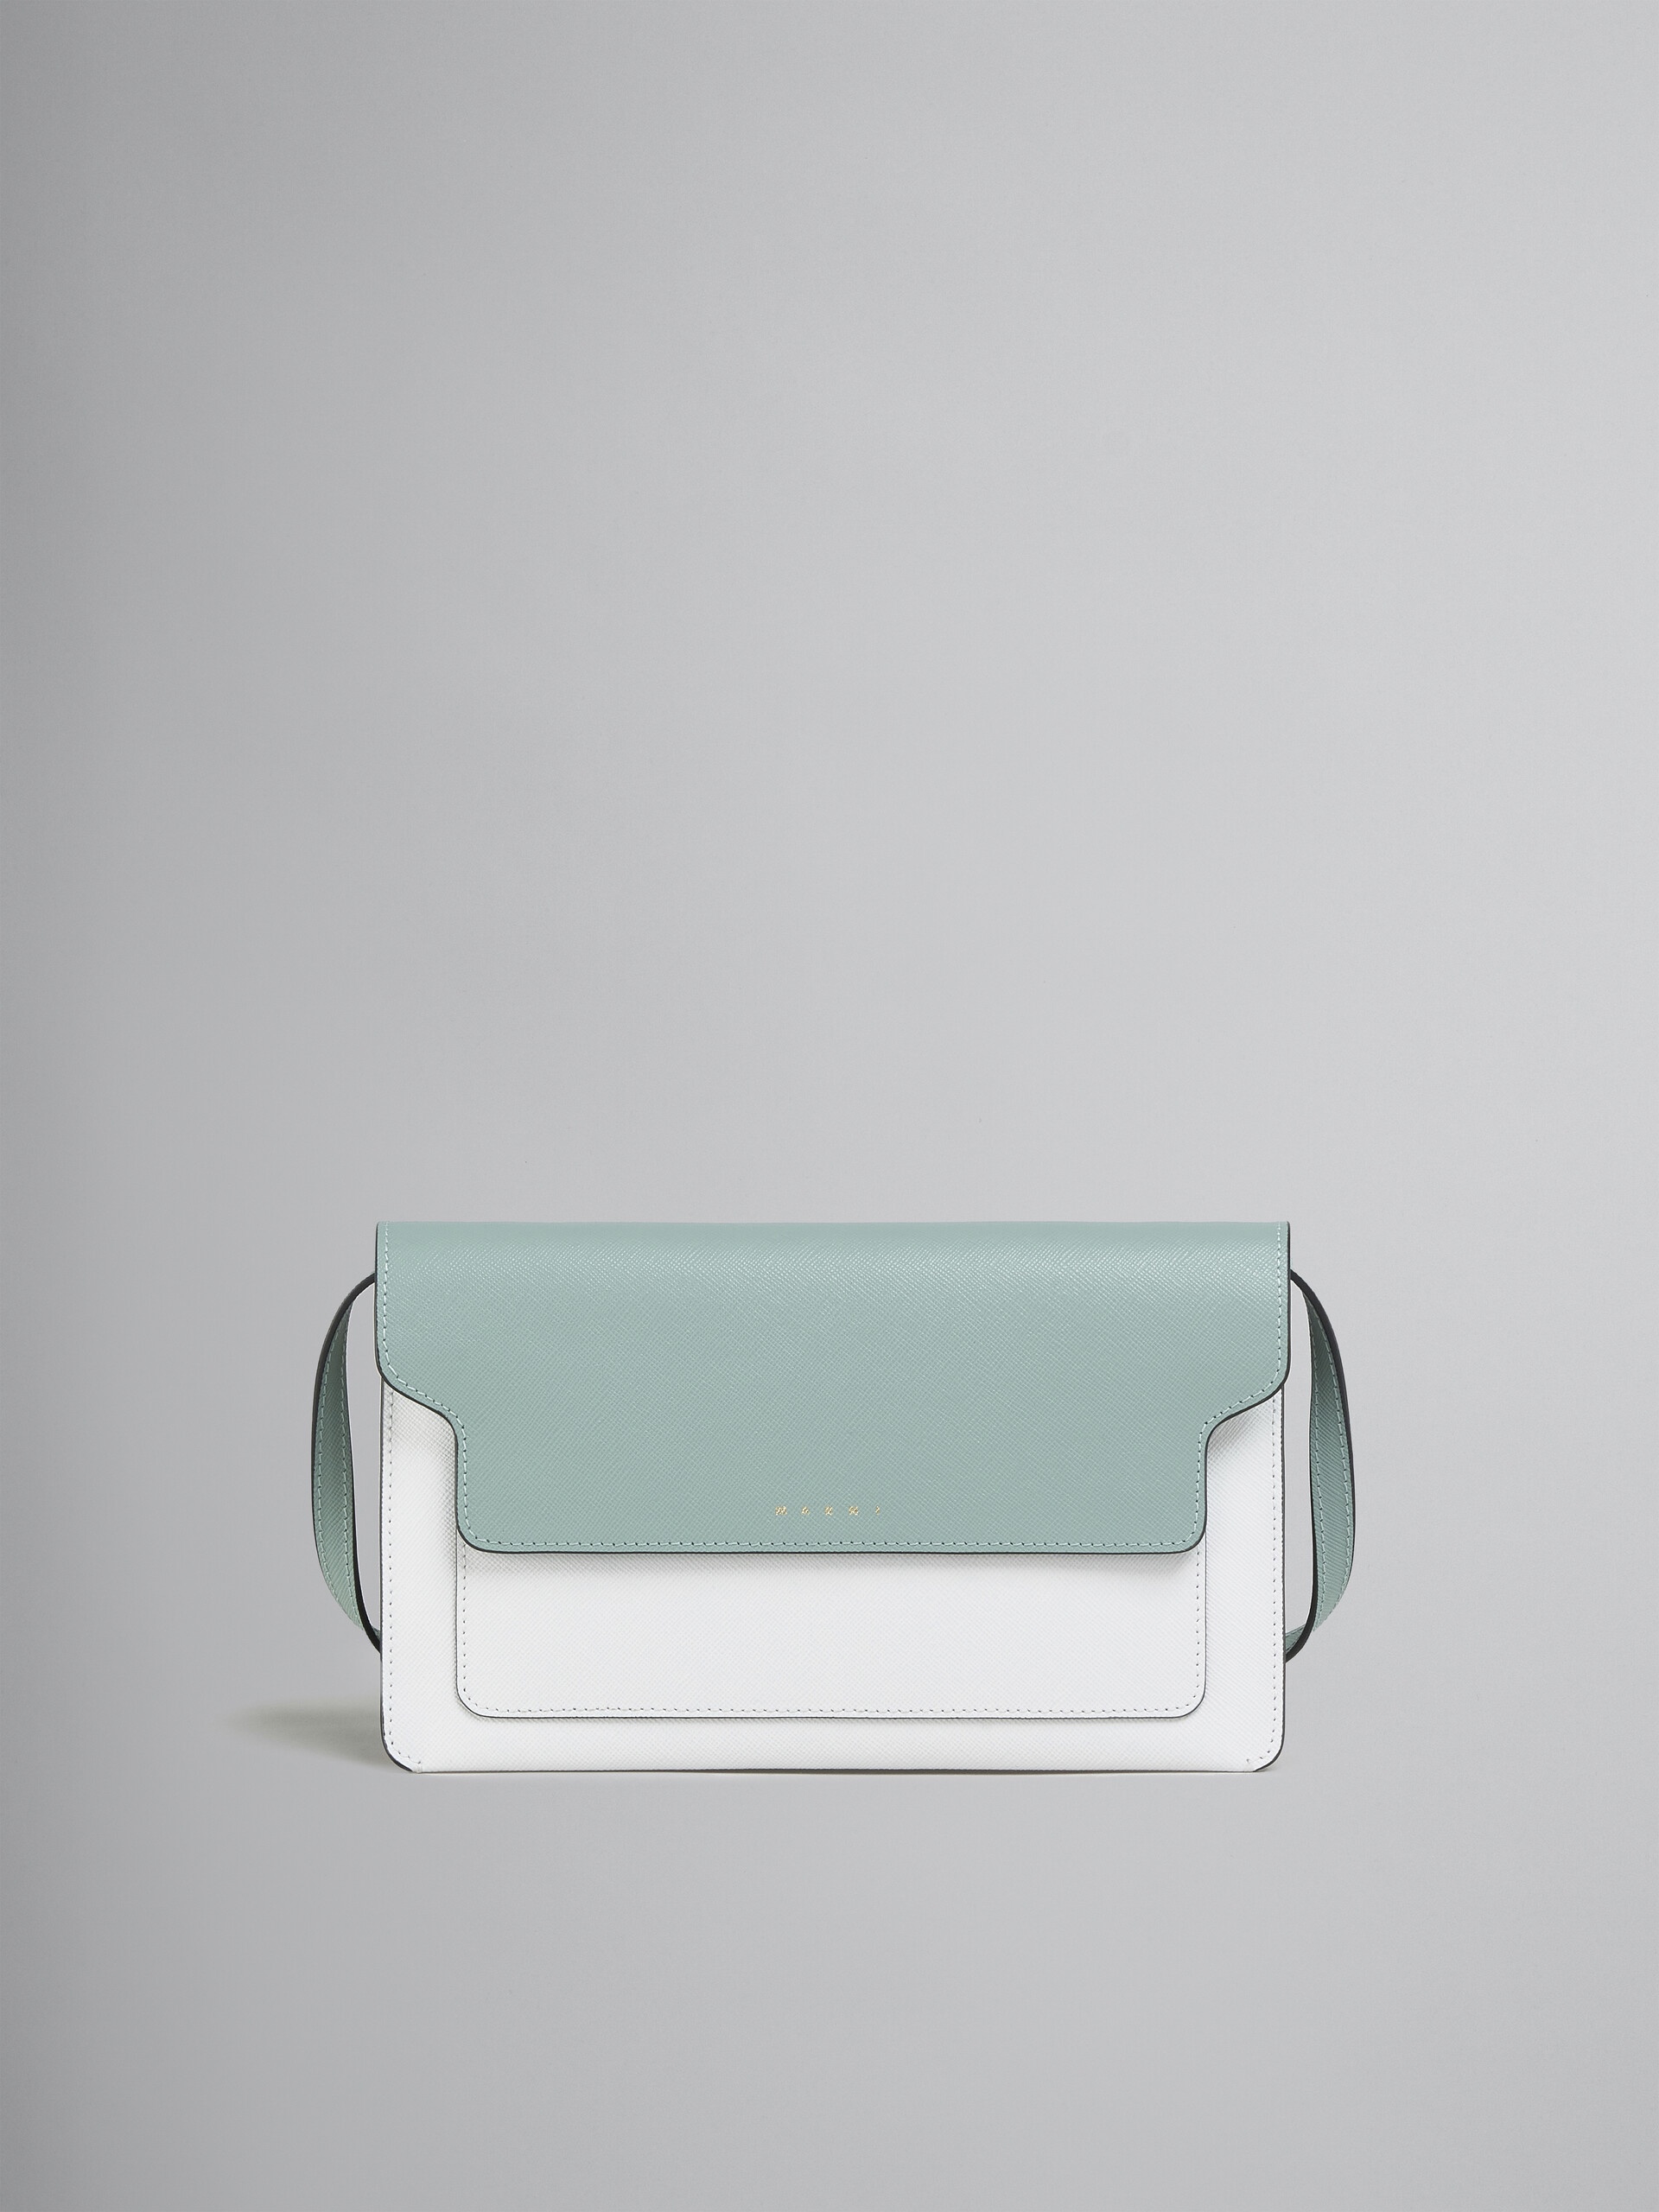 Trunk Clutch in light blue beige and white saffiano leather